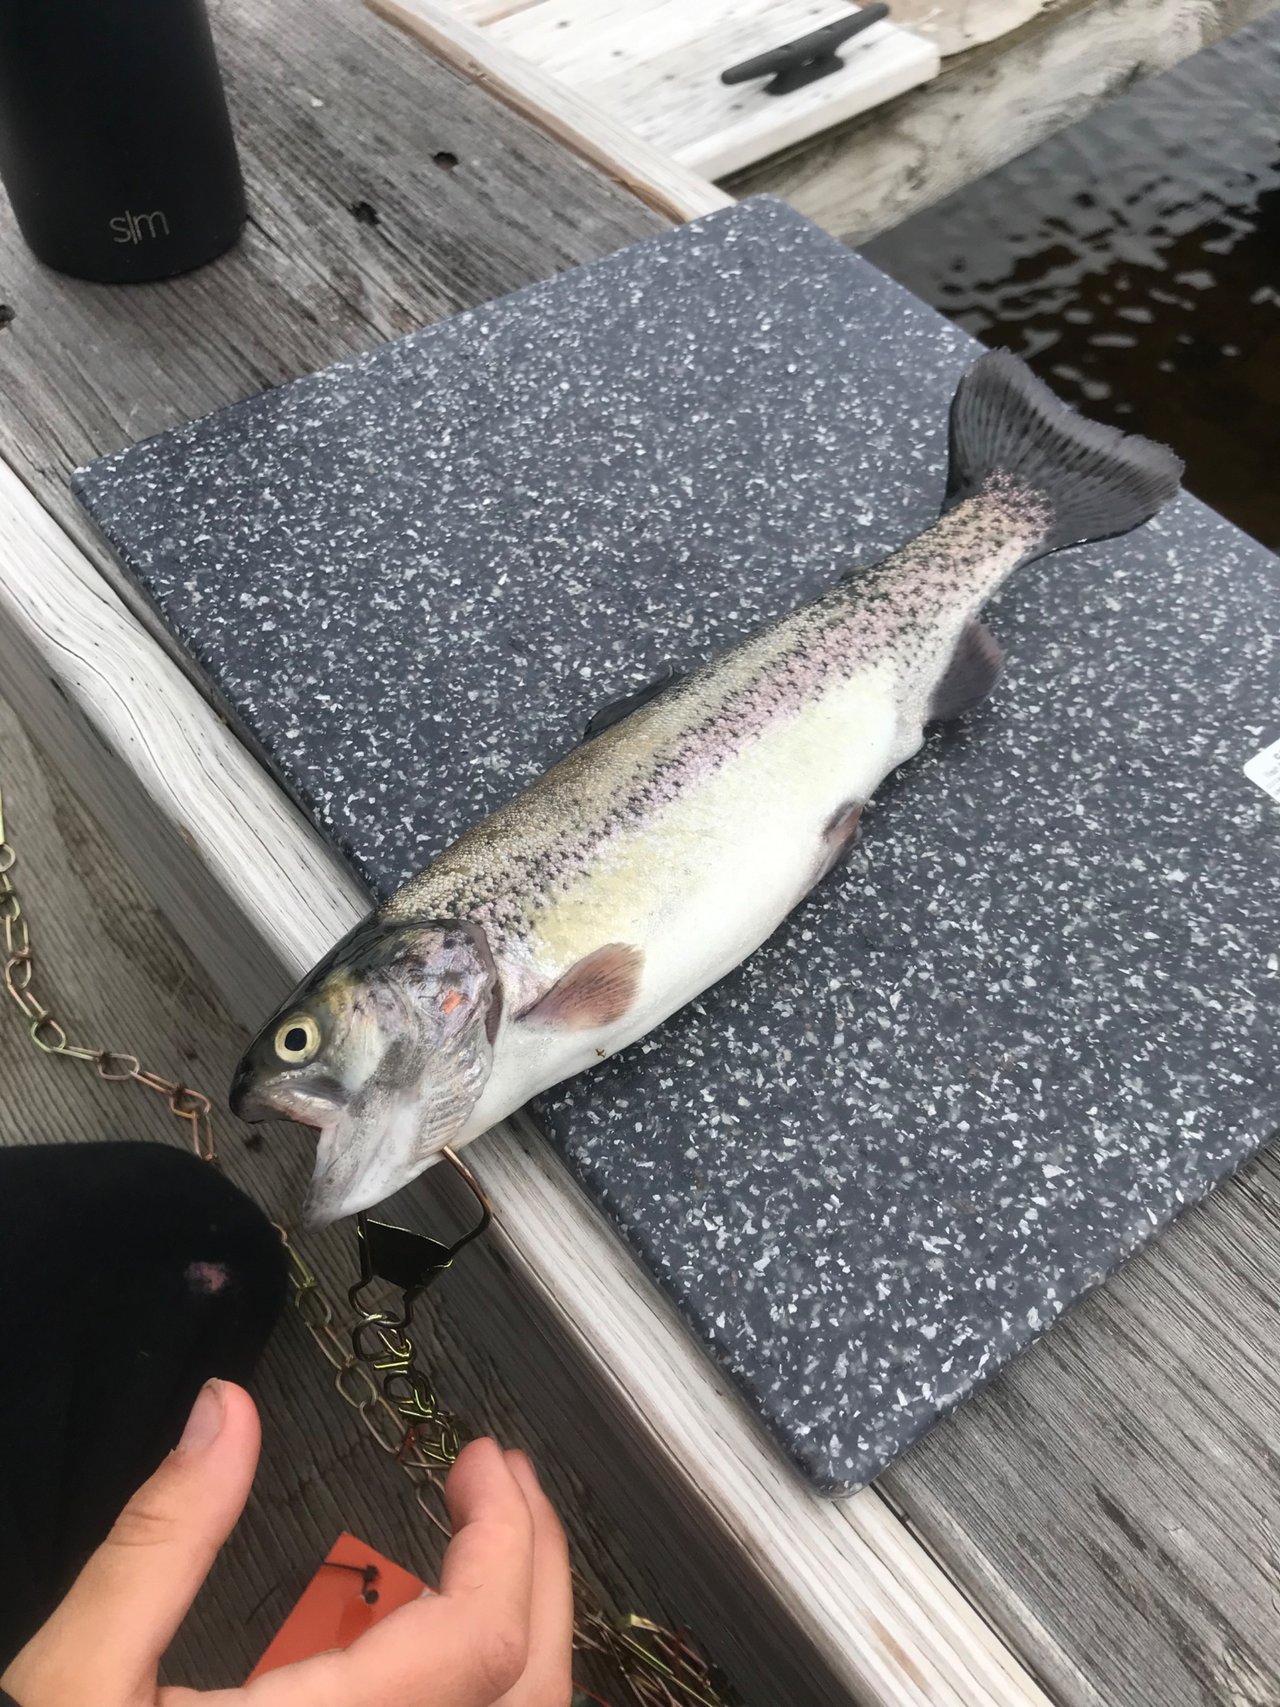 Cleaning Our First Trout